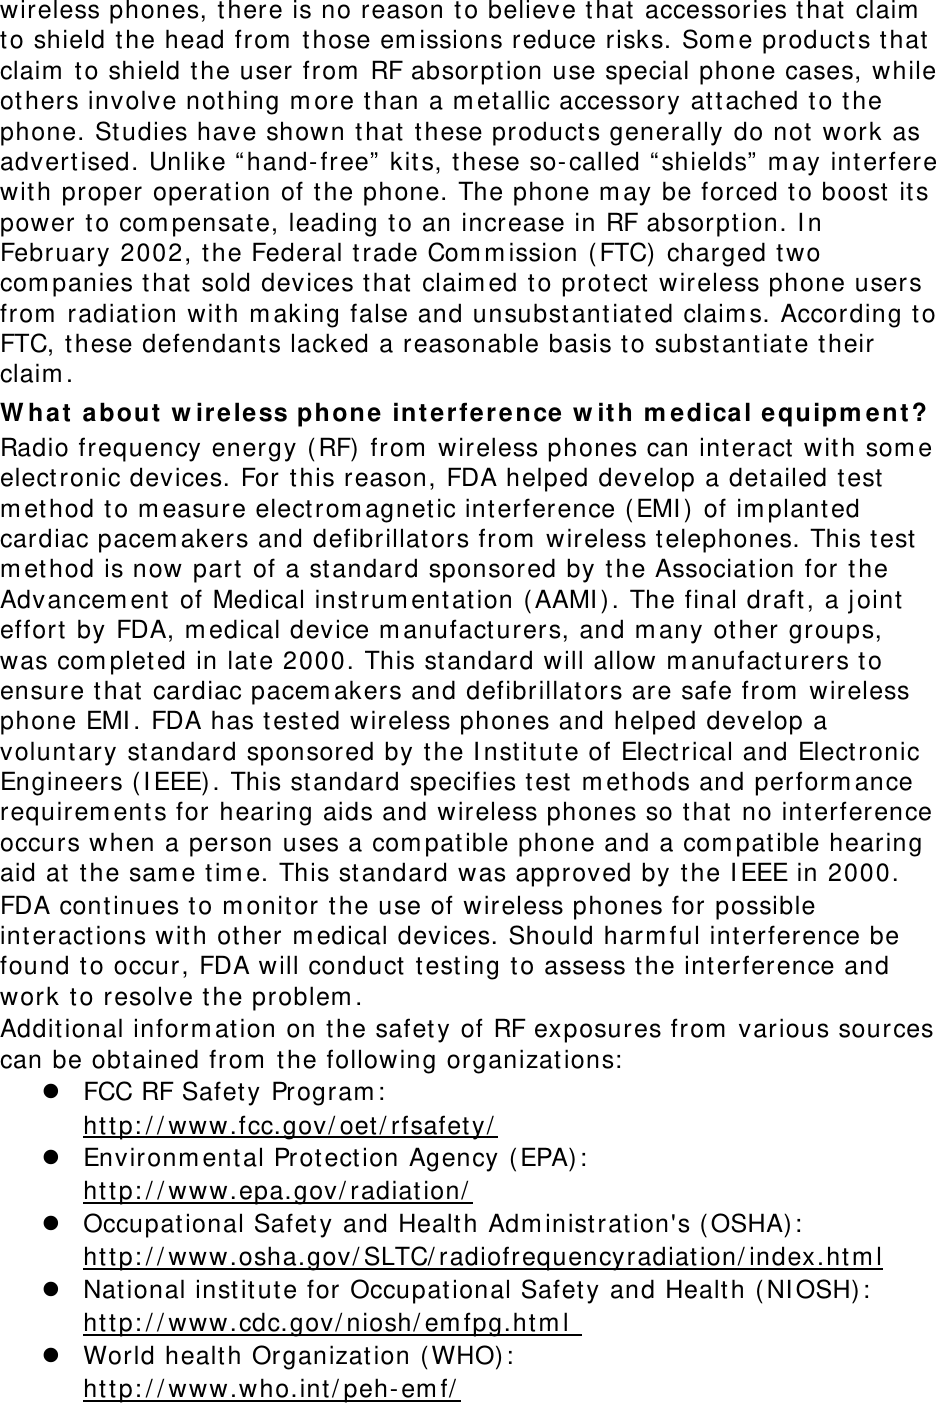 wireless phones, there is no reason t o believe that  accessories that  claim  to shield t he head from  t hose em issions reduce risks. Som e products that claim  to shield t he user from  RF absorpt ion use special phone cases, while ot hers involve not hing m ore t han a m etallic accessory at t ached t o t he phone. Studies have shown t hat  these products generally do not  work as advert ised. Unlike “ hand- free”  kit s, these so- called “ shields” m ay interfere wit h proper operat ion of t he phone. The phone m ay be forced t o boost it s power t o com pensate, leading t o an increase in RF absorption. I n February 2002, t he Federal t rade Com m ission ( FTC)  charged t wo com panies that  sold devices t hat  claim ed to prot ect wireless phone users from  radiat ion with m aking false and unsubstant iated claim s. According t o FTC, these defendant s lacked a reasonable basis to substant iate t heir claim . W ha t  a bou t  w ire less phone int e rfer ence w it h m e dical equipm en t ? Radio frequency energy ( RF)  from  wireless phones can int eract  with som e elect ronic devices. For t his reason, FDA helped develop a det ailed test m et hod t o m easure elect rom agnet ic int erference ( EMI )  of im planted cardiac pacem akers and defibrillat ors from  wireless telephones. This t est m et hod is now part of a st andard sponsored by t he Associat ion for t he Advancem ent  of Medical instrum ent at ion ( AAMI ) . The final draft, a j oint  effort  by FDA, m edical device m anufacturers, and m any other groups, was com pleted in late 2000. This st andard will allow m anufact urers t o ensure that  cardiac pacem akers and defibrillators are safe from  wireless phone EMI . FDA has t ested wireless phones and helped develop a voluntary st andard sponsored by t he I nstitut e of Electrical and Electronic Engineers ( I EEE) . This standard specifies t est m et hods and perform ance requirem ents for hearing aids and wireless phones so t hat  no interference occurs when a person uses a com pat ible phone and a com pat ible hearing aid at  t he sam e tim e. This st andard was approved by t he I EEE in 2000. FDA cont inues to m onitor t he use of wireless phones for possible interactions with other m edical devices. Should harm ful int erference be found t o occur, FDA will conduct  t esting t o assess t he int erference and work t o resolve the problem . Additional inform at ion on t he safet y of RF exposures from  various sources can be obt ained from  t he following organizat ions:  z FCC RF Safet y Program :   ht t p: / / www.fcc.gov/ oet/ rfsafet y/  z Environm ent al Protect ion Agency (EPA) :   ht t p: / / www.epa.gov/ radiat ion/  z Occupat ional Safet y and Health Adm inistrat ion&apos;s ( OSHA) :          ht t p: / / www.osha.gov/ SLTC/ radiofrequencyradiat ion/ index.ht m l z National institut e for Occupat ional Safet y and Health (NI OSH):   ht t p: / / www.cdc.gov/ niosh/ em fpg.ht m l  z World healt h Organizat ion ( WHO):   ht t p: / / www.who.int / peh- em f/  